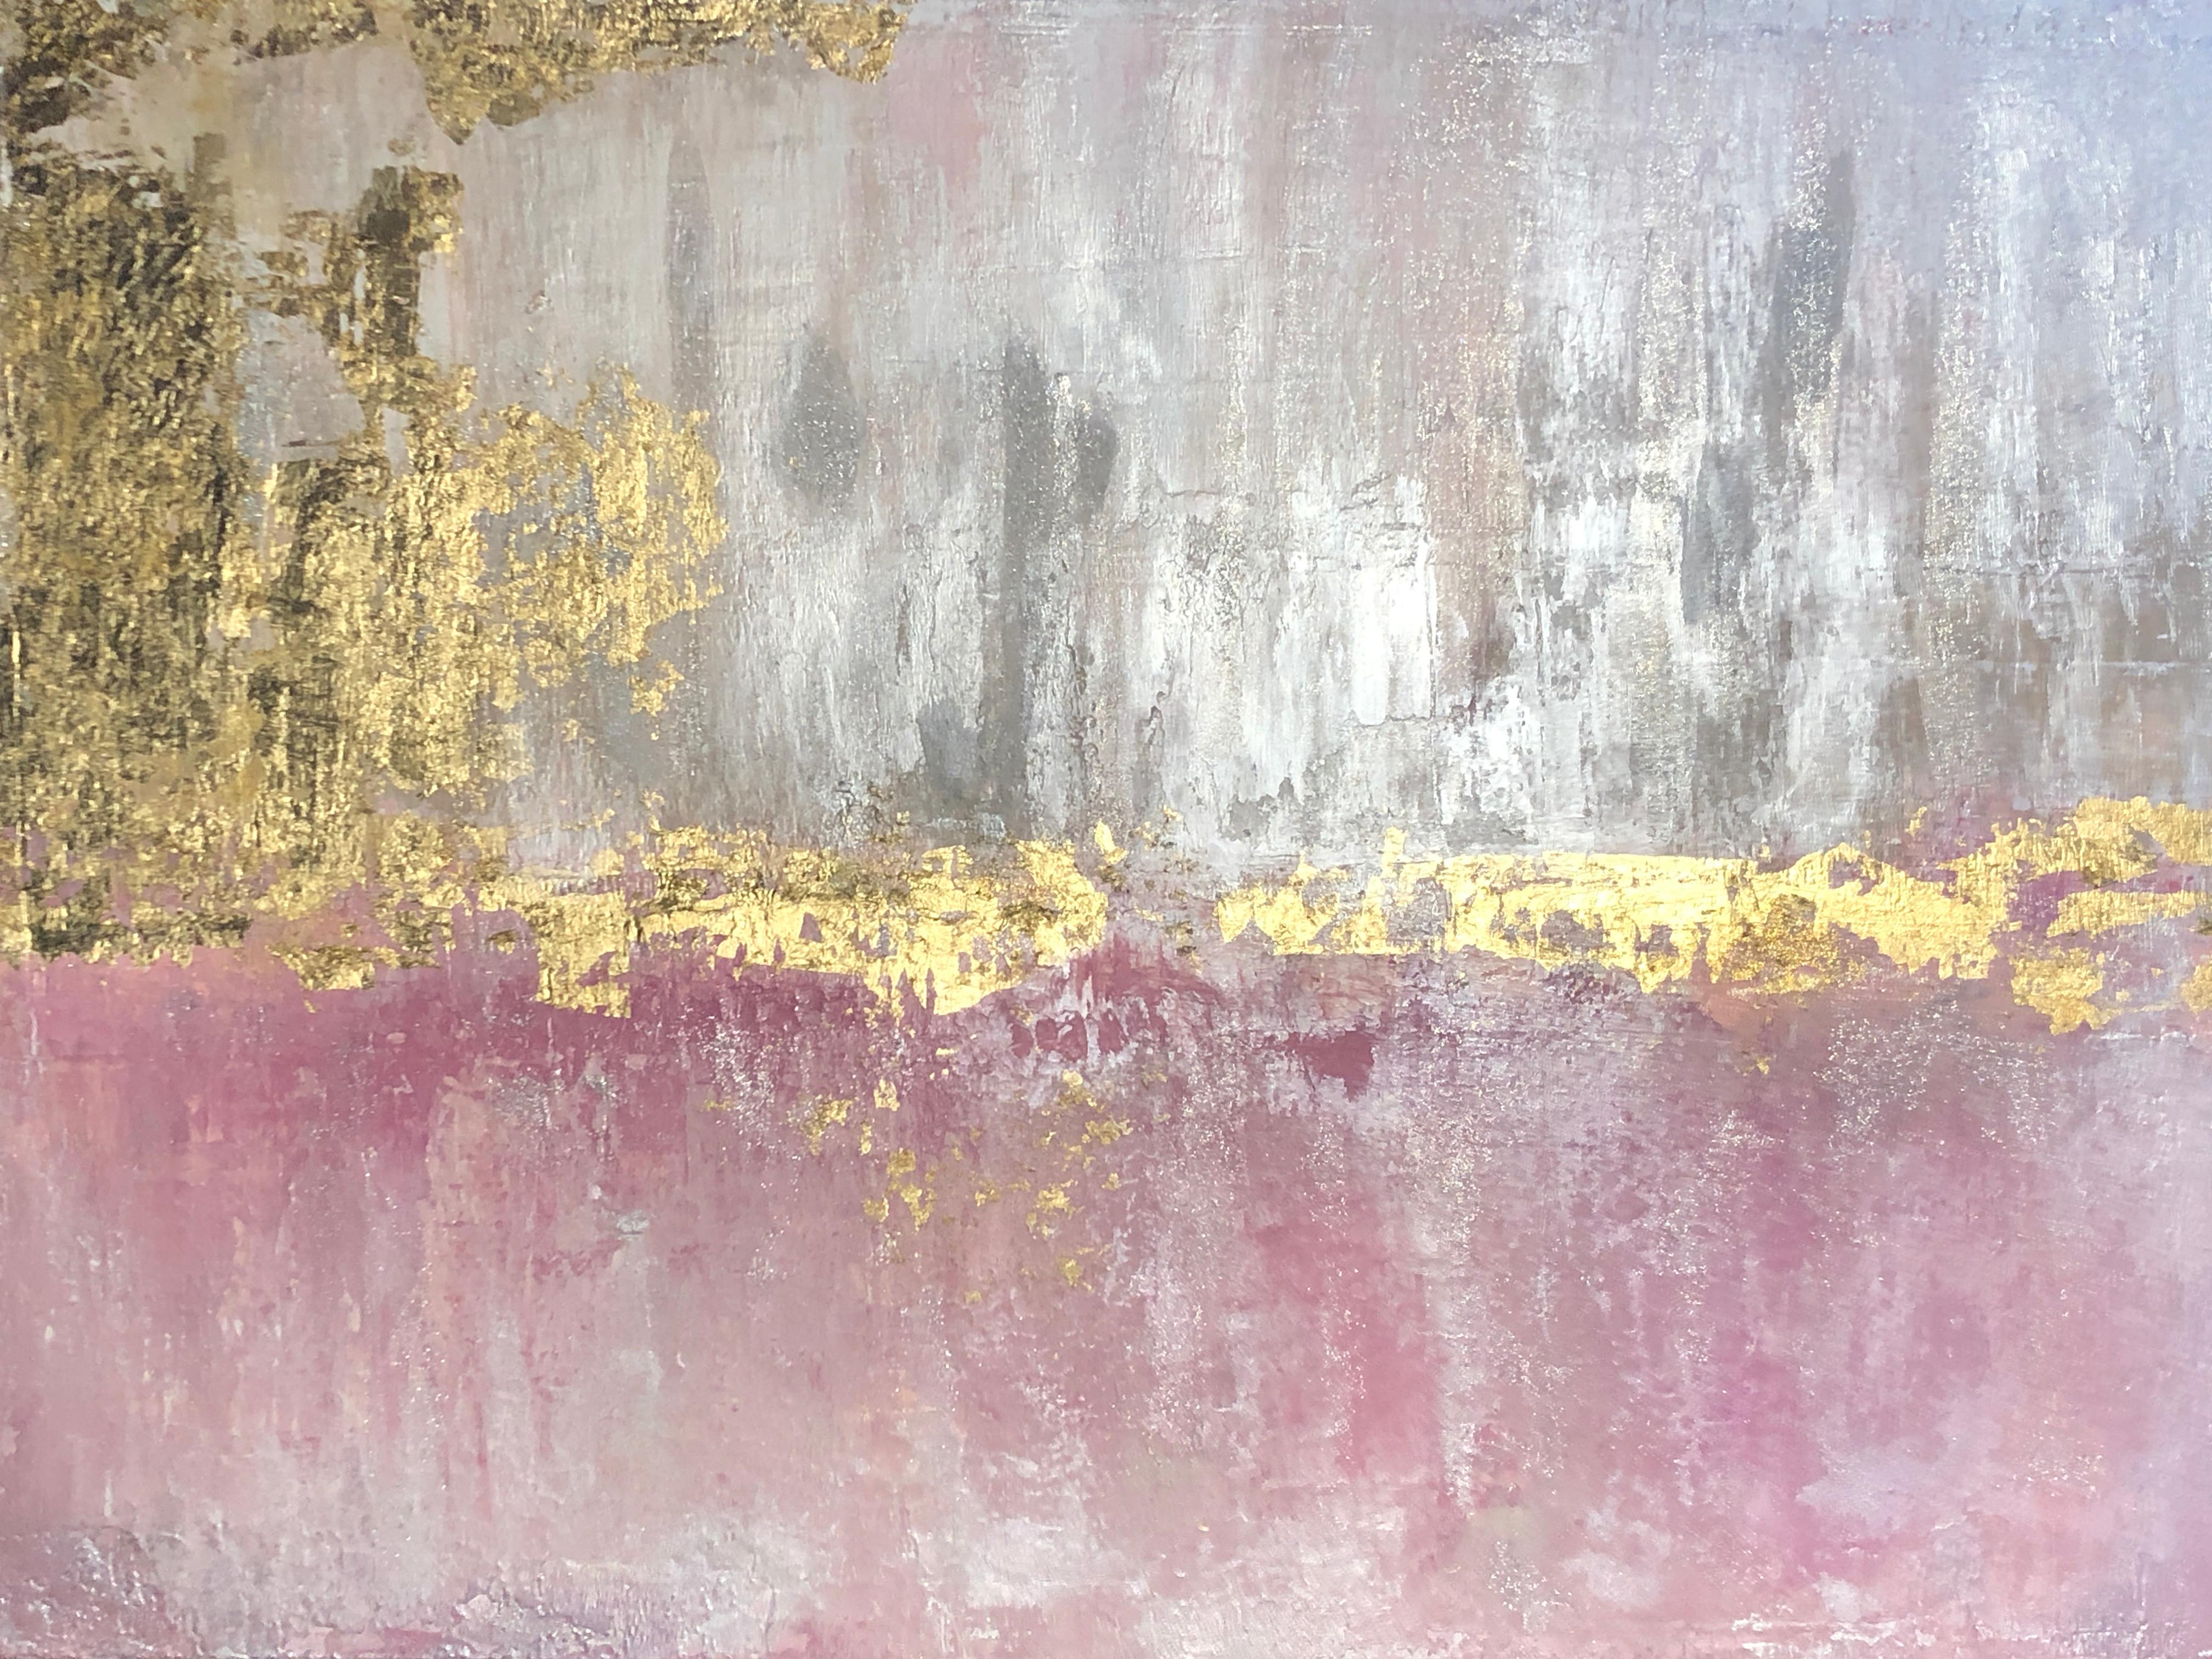 Irena Orlov Interior Painting - Gold Leaf Pink Silver Abstract Textured Art on Canvas 36 x 48" Pink Golden Fog